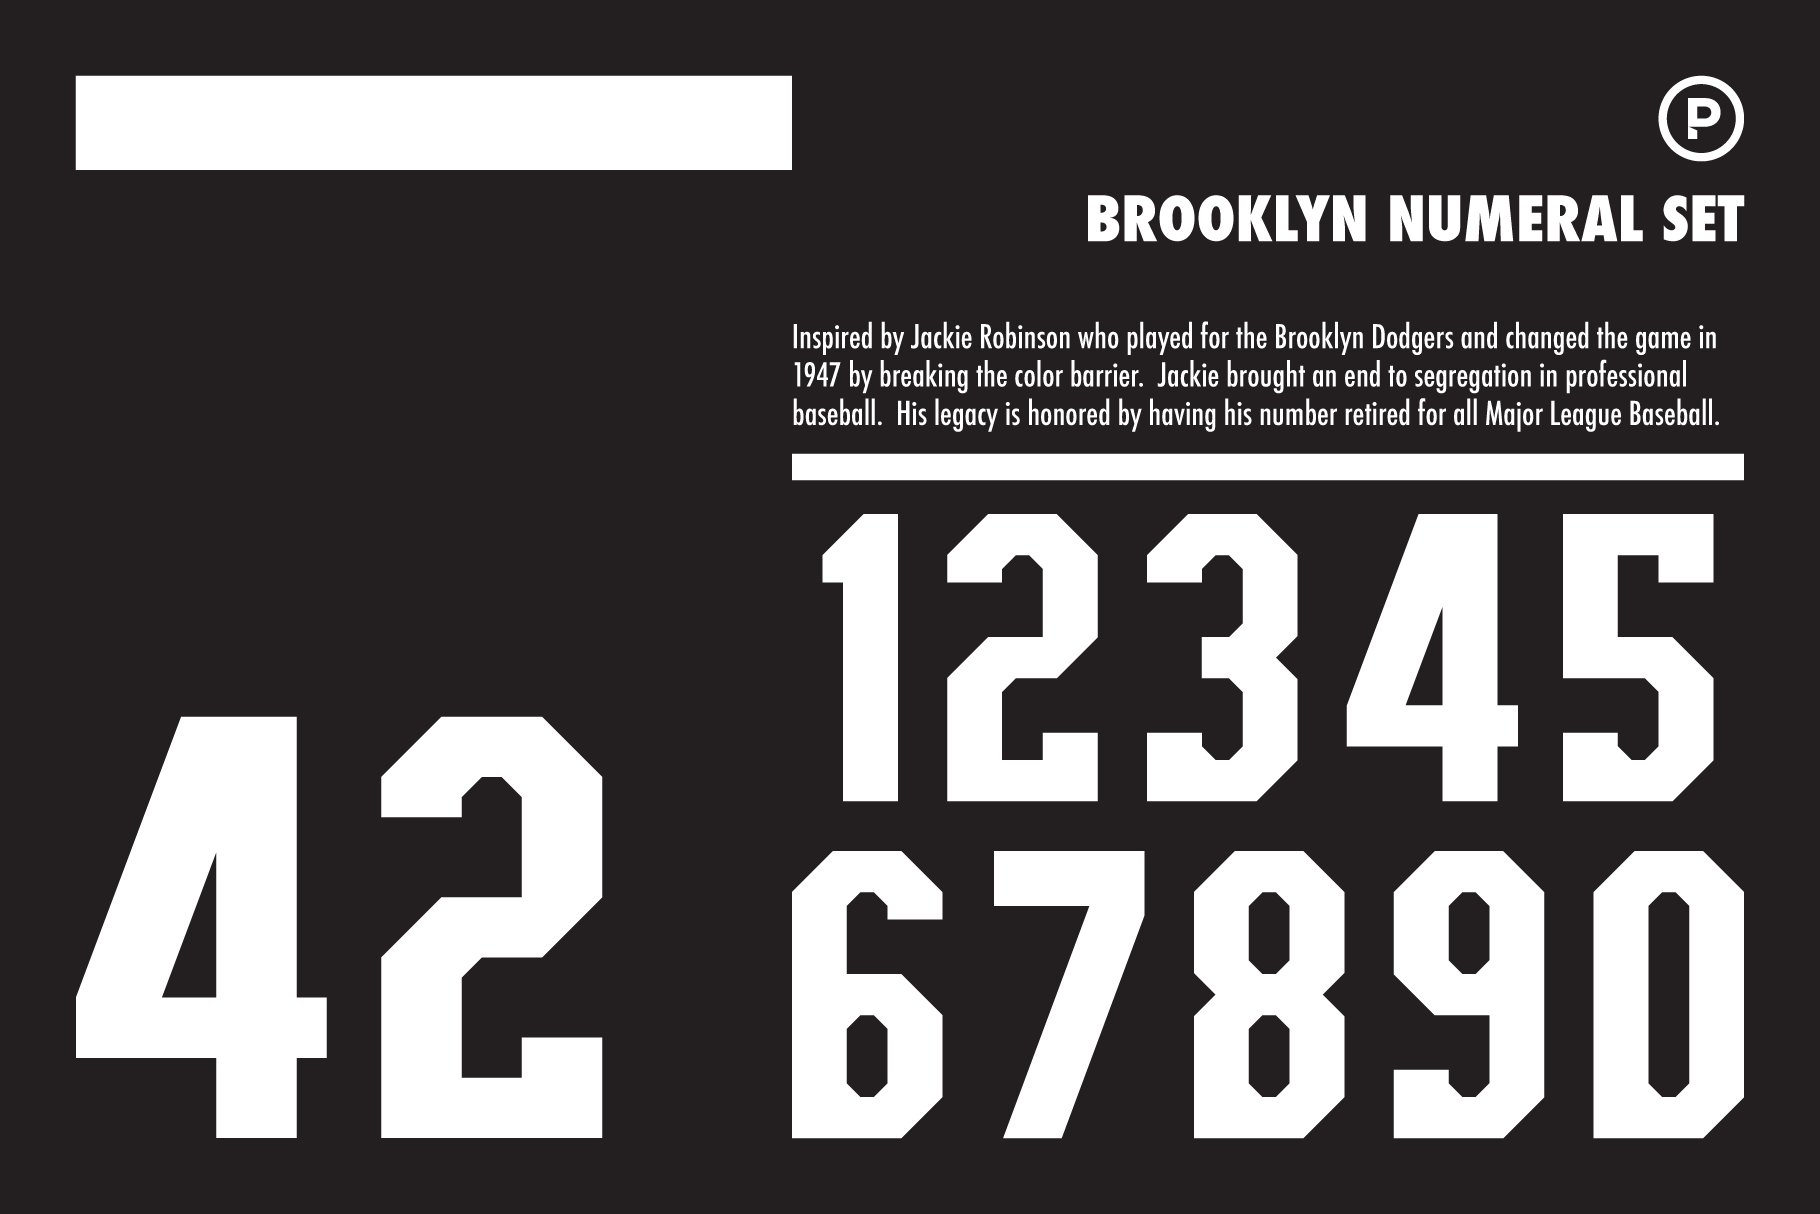 Brooklyn Numeral Set cover image.